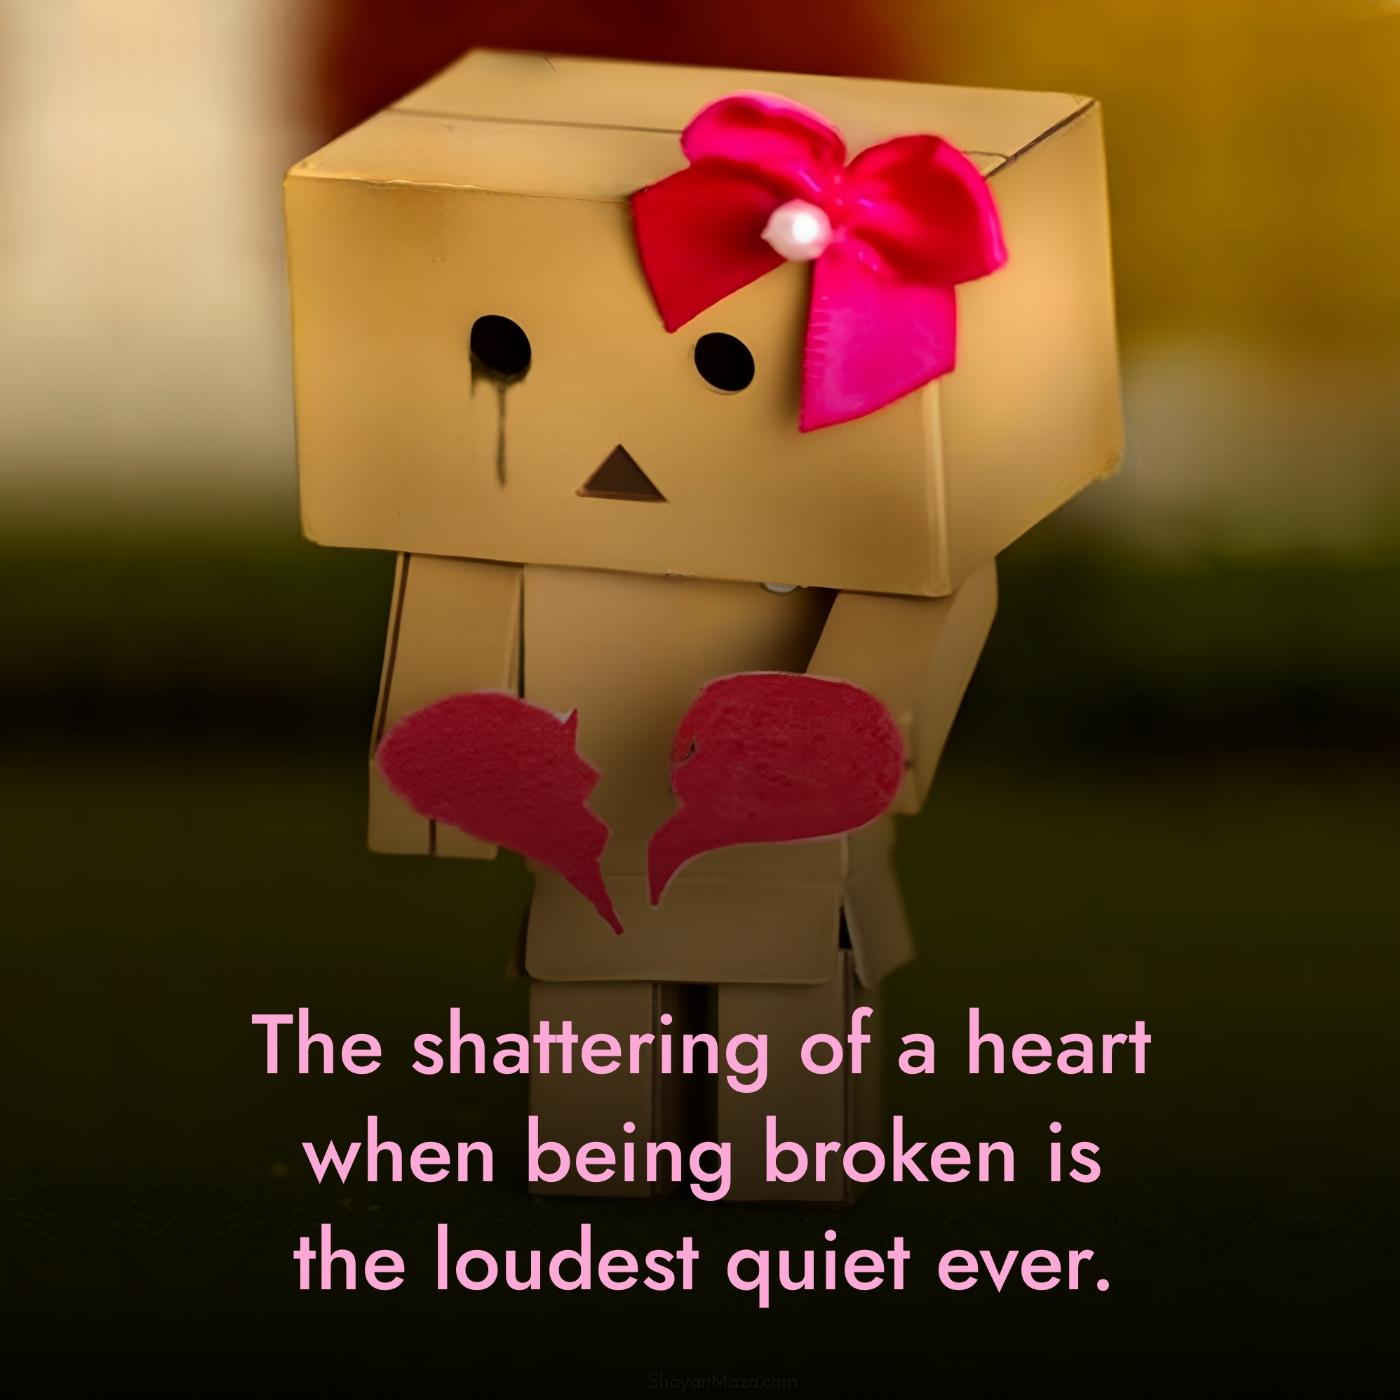 The shattering of a heart when being broken is the loudest